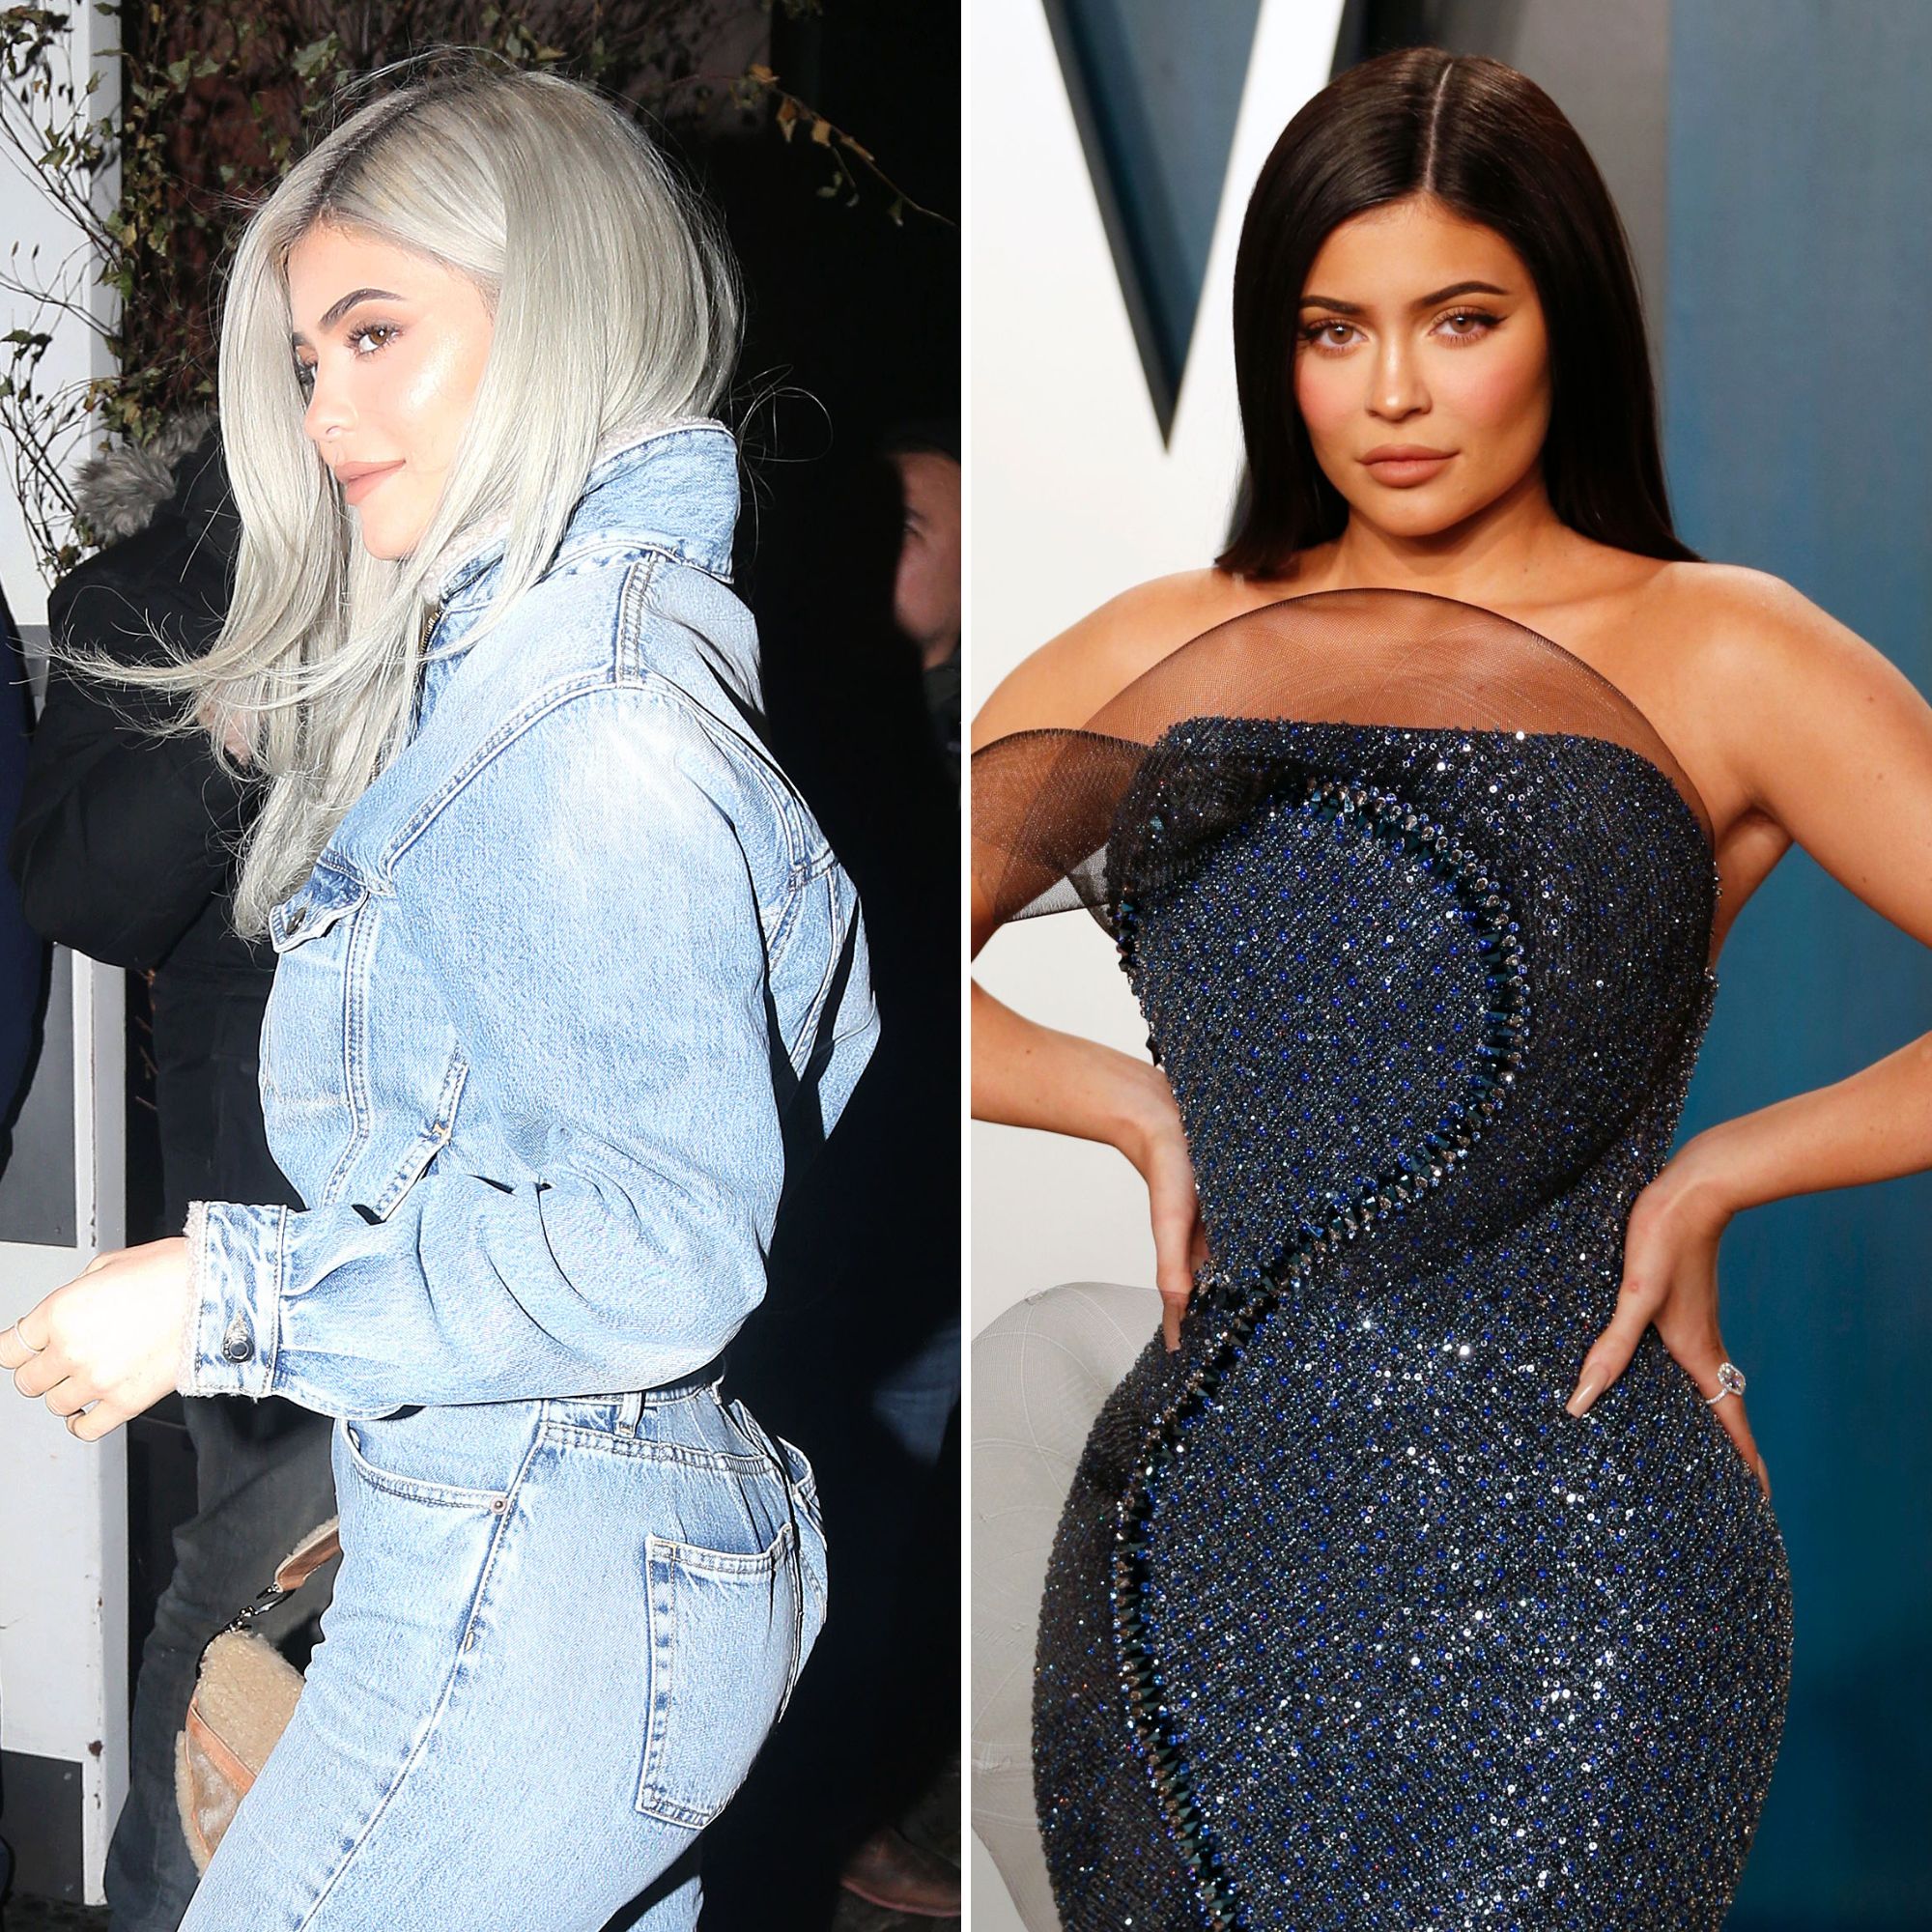 Kylie Jenner 'reversed her BBL,' fans claim as star's butt appears